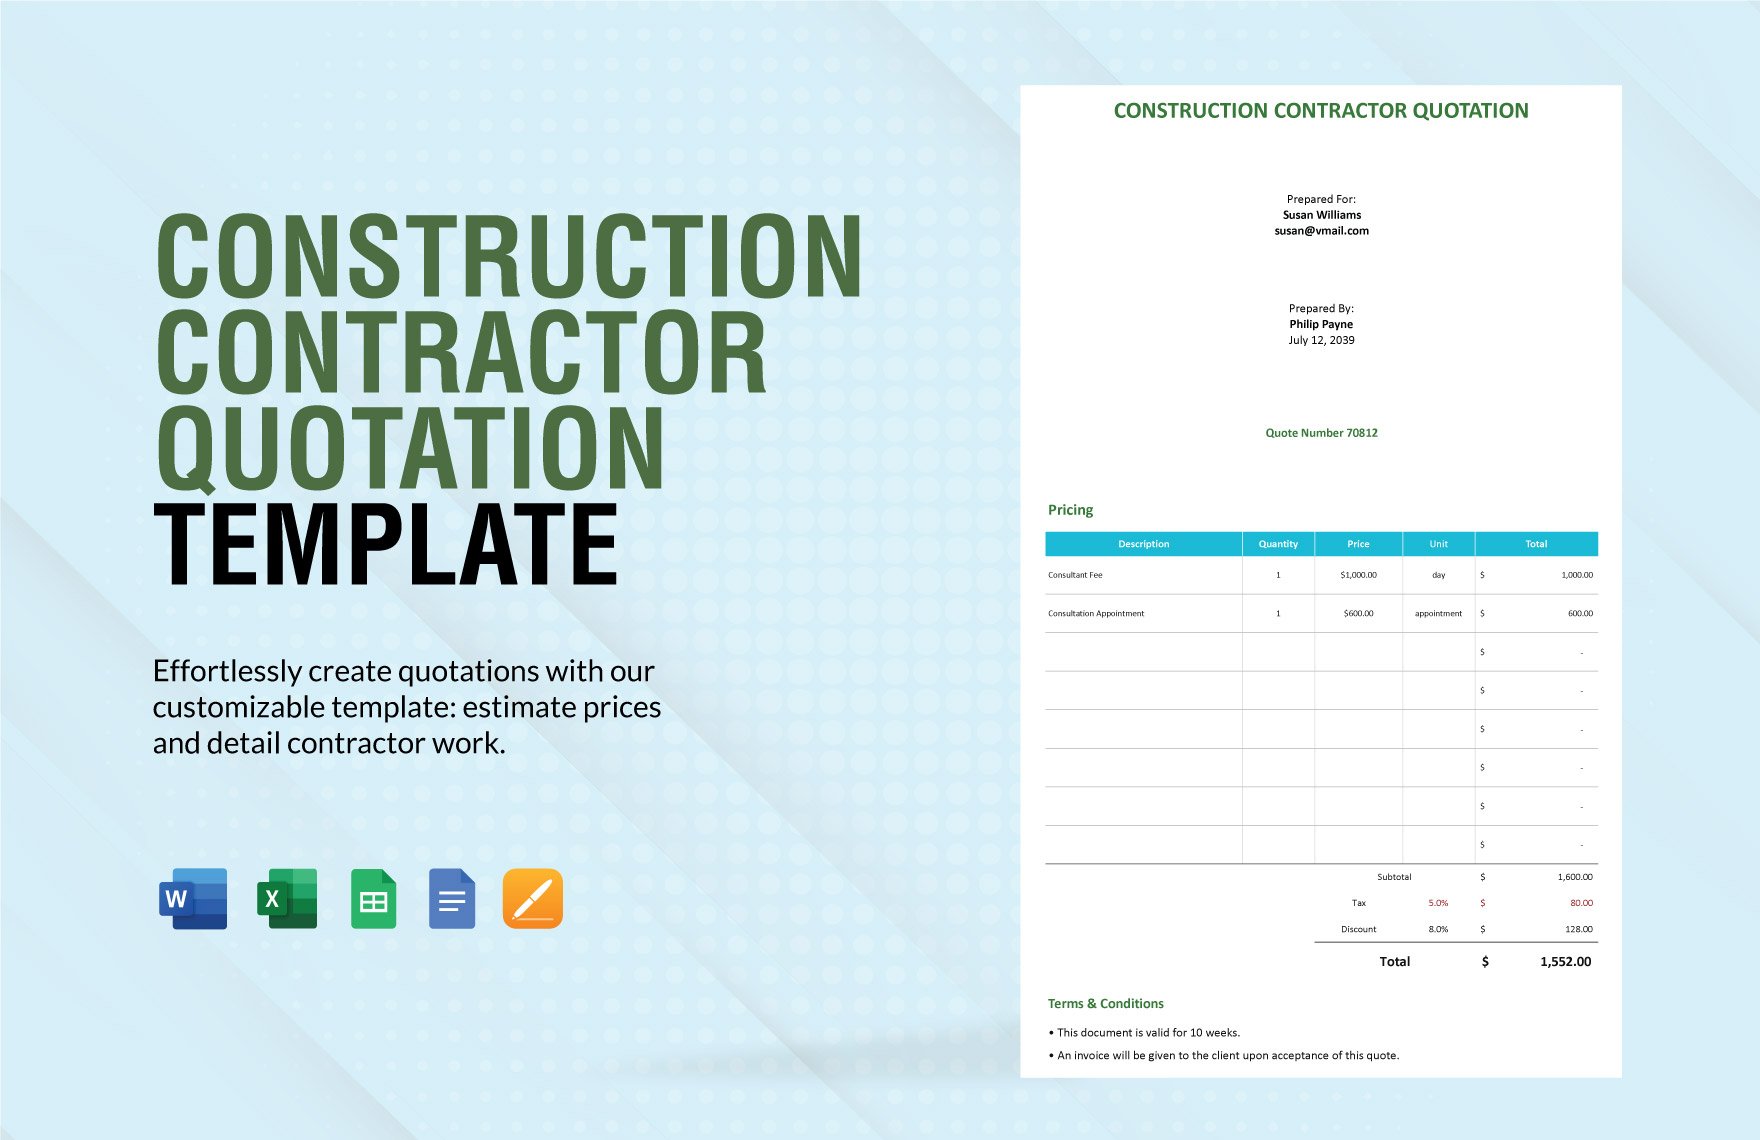 Construction Contractor Quotation Template